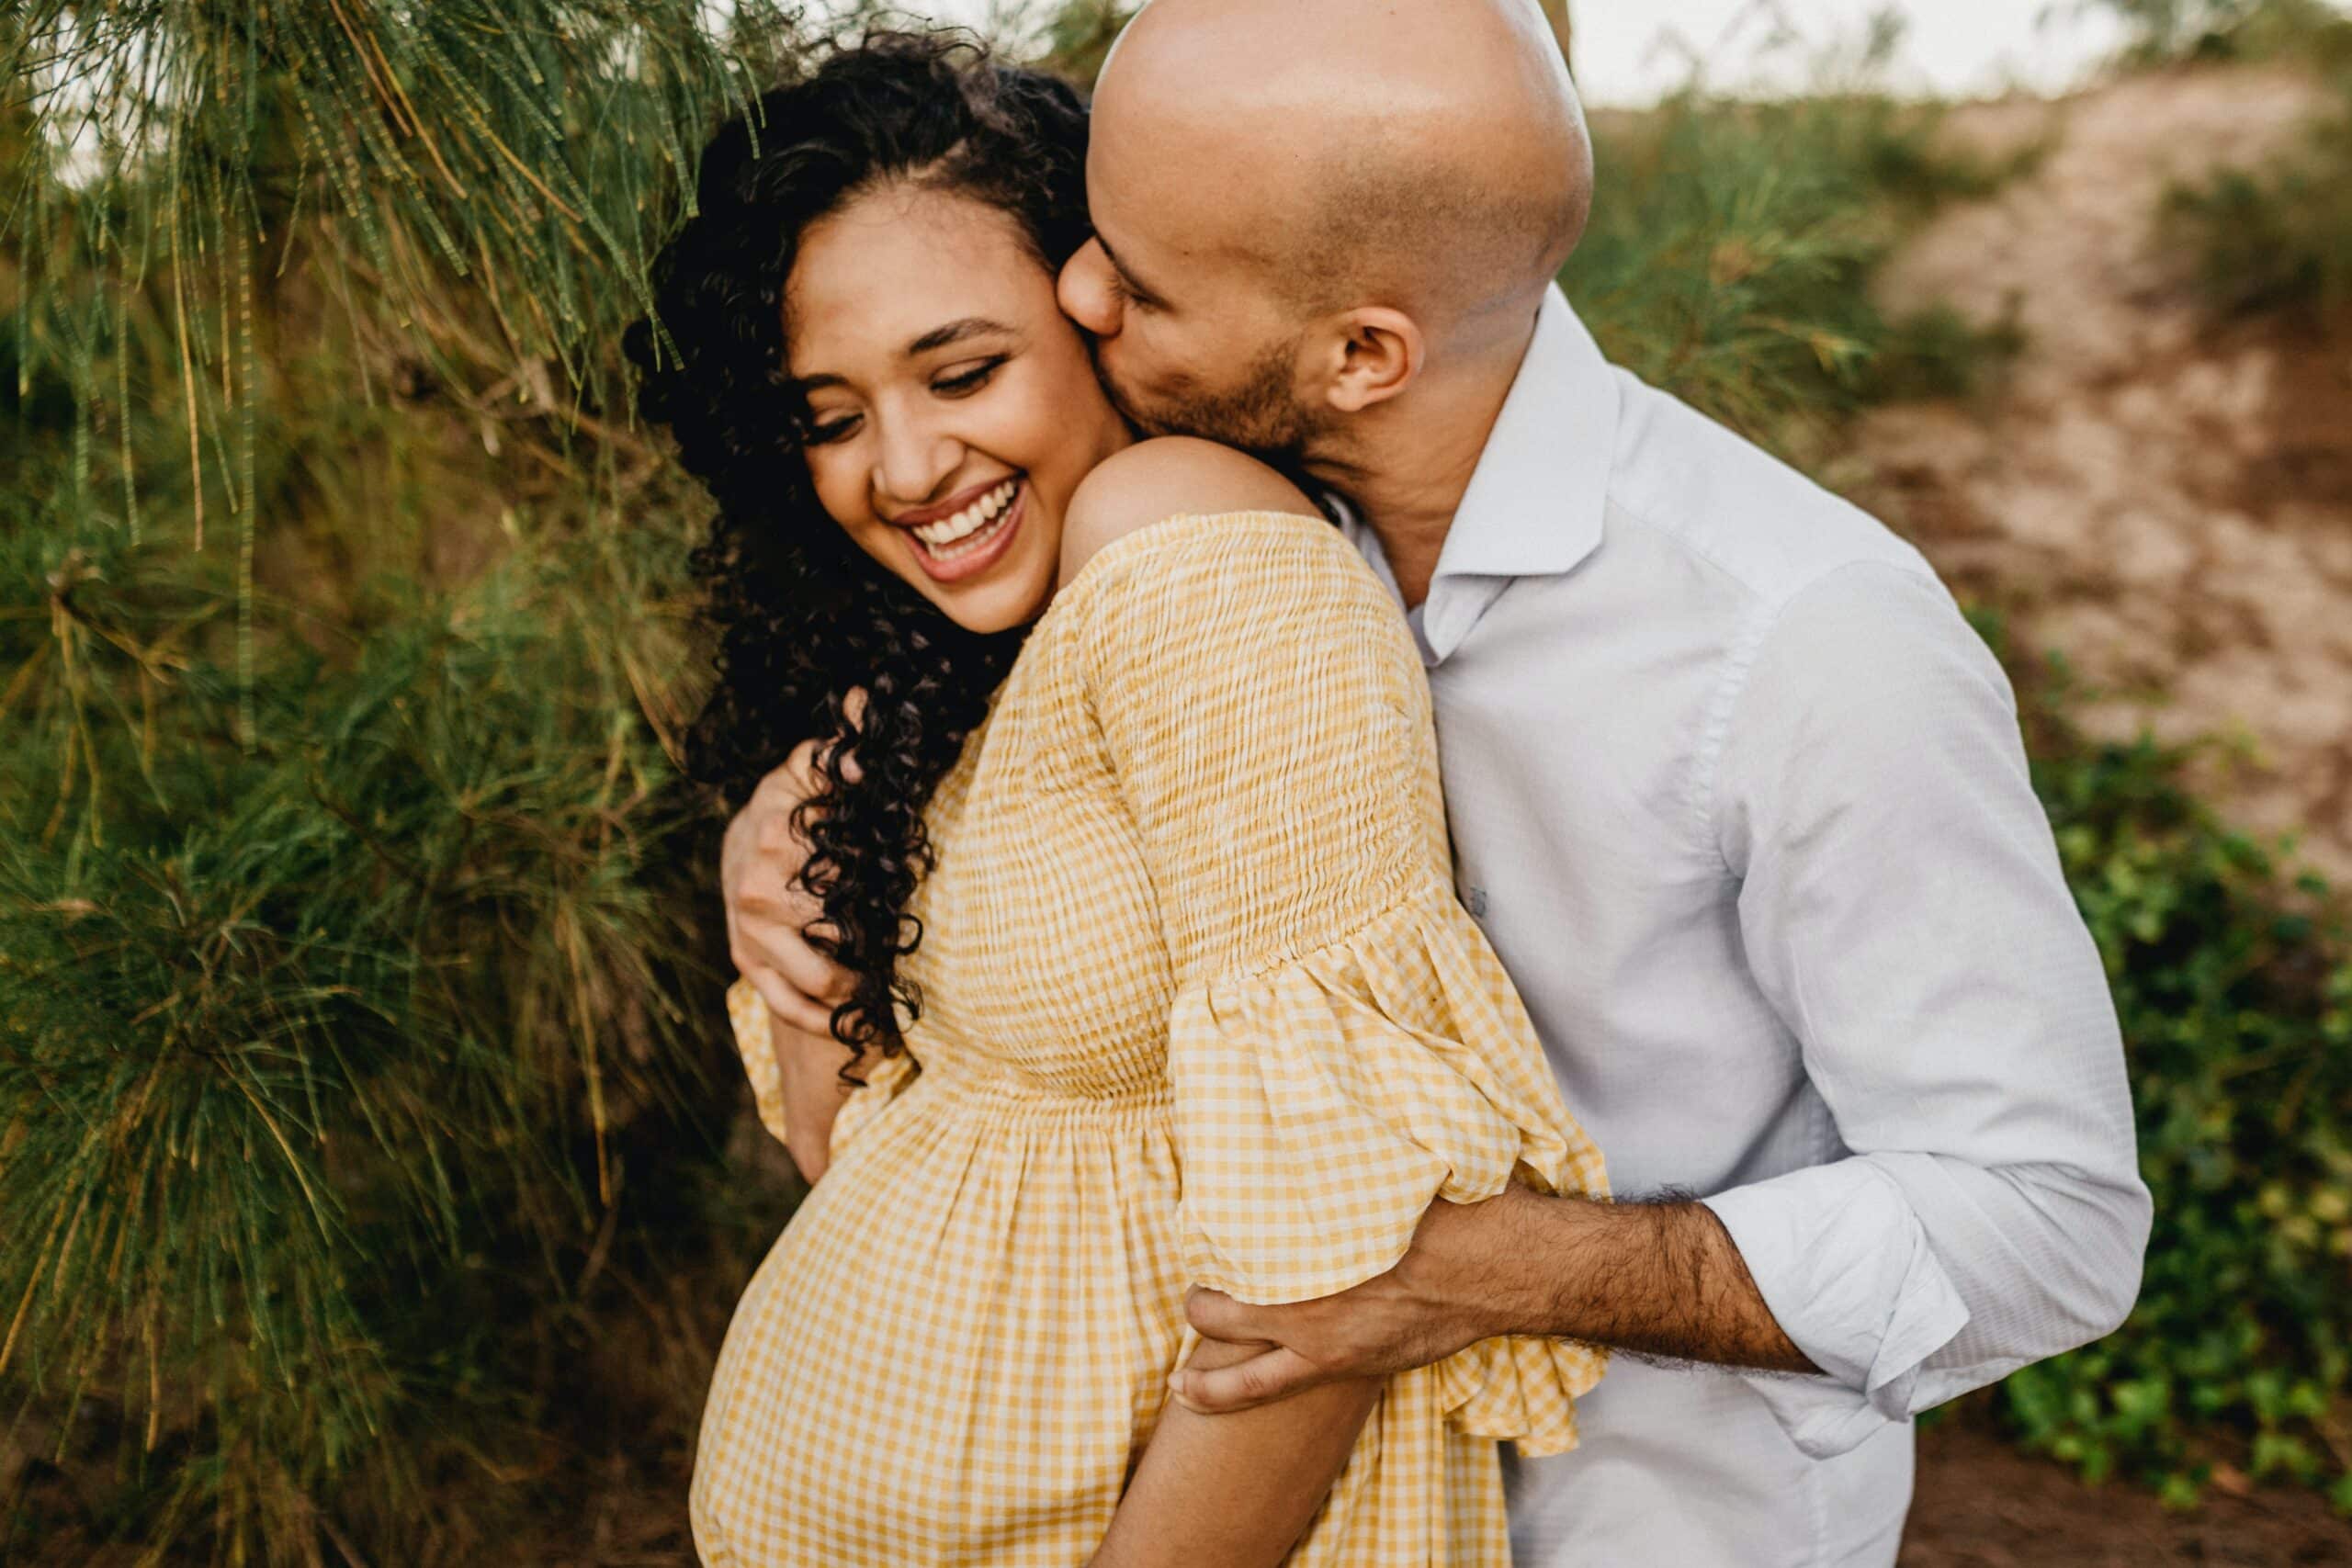 From Classic to Creative: Maternity Photography Ideas that Celebrate All Types of Motherhood